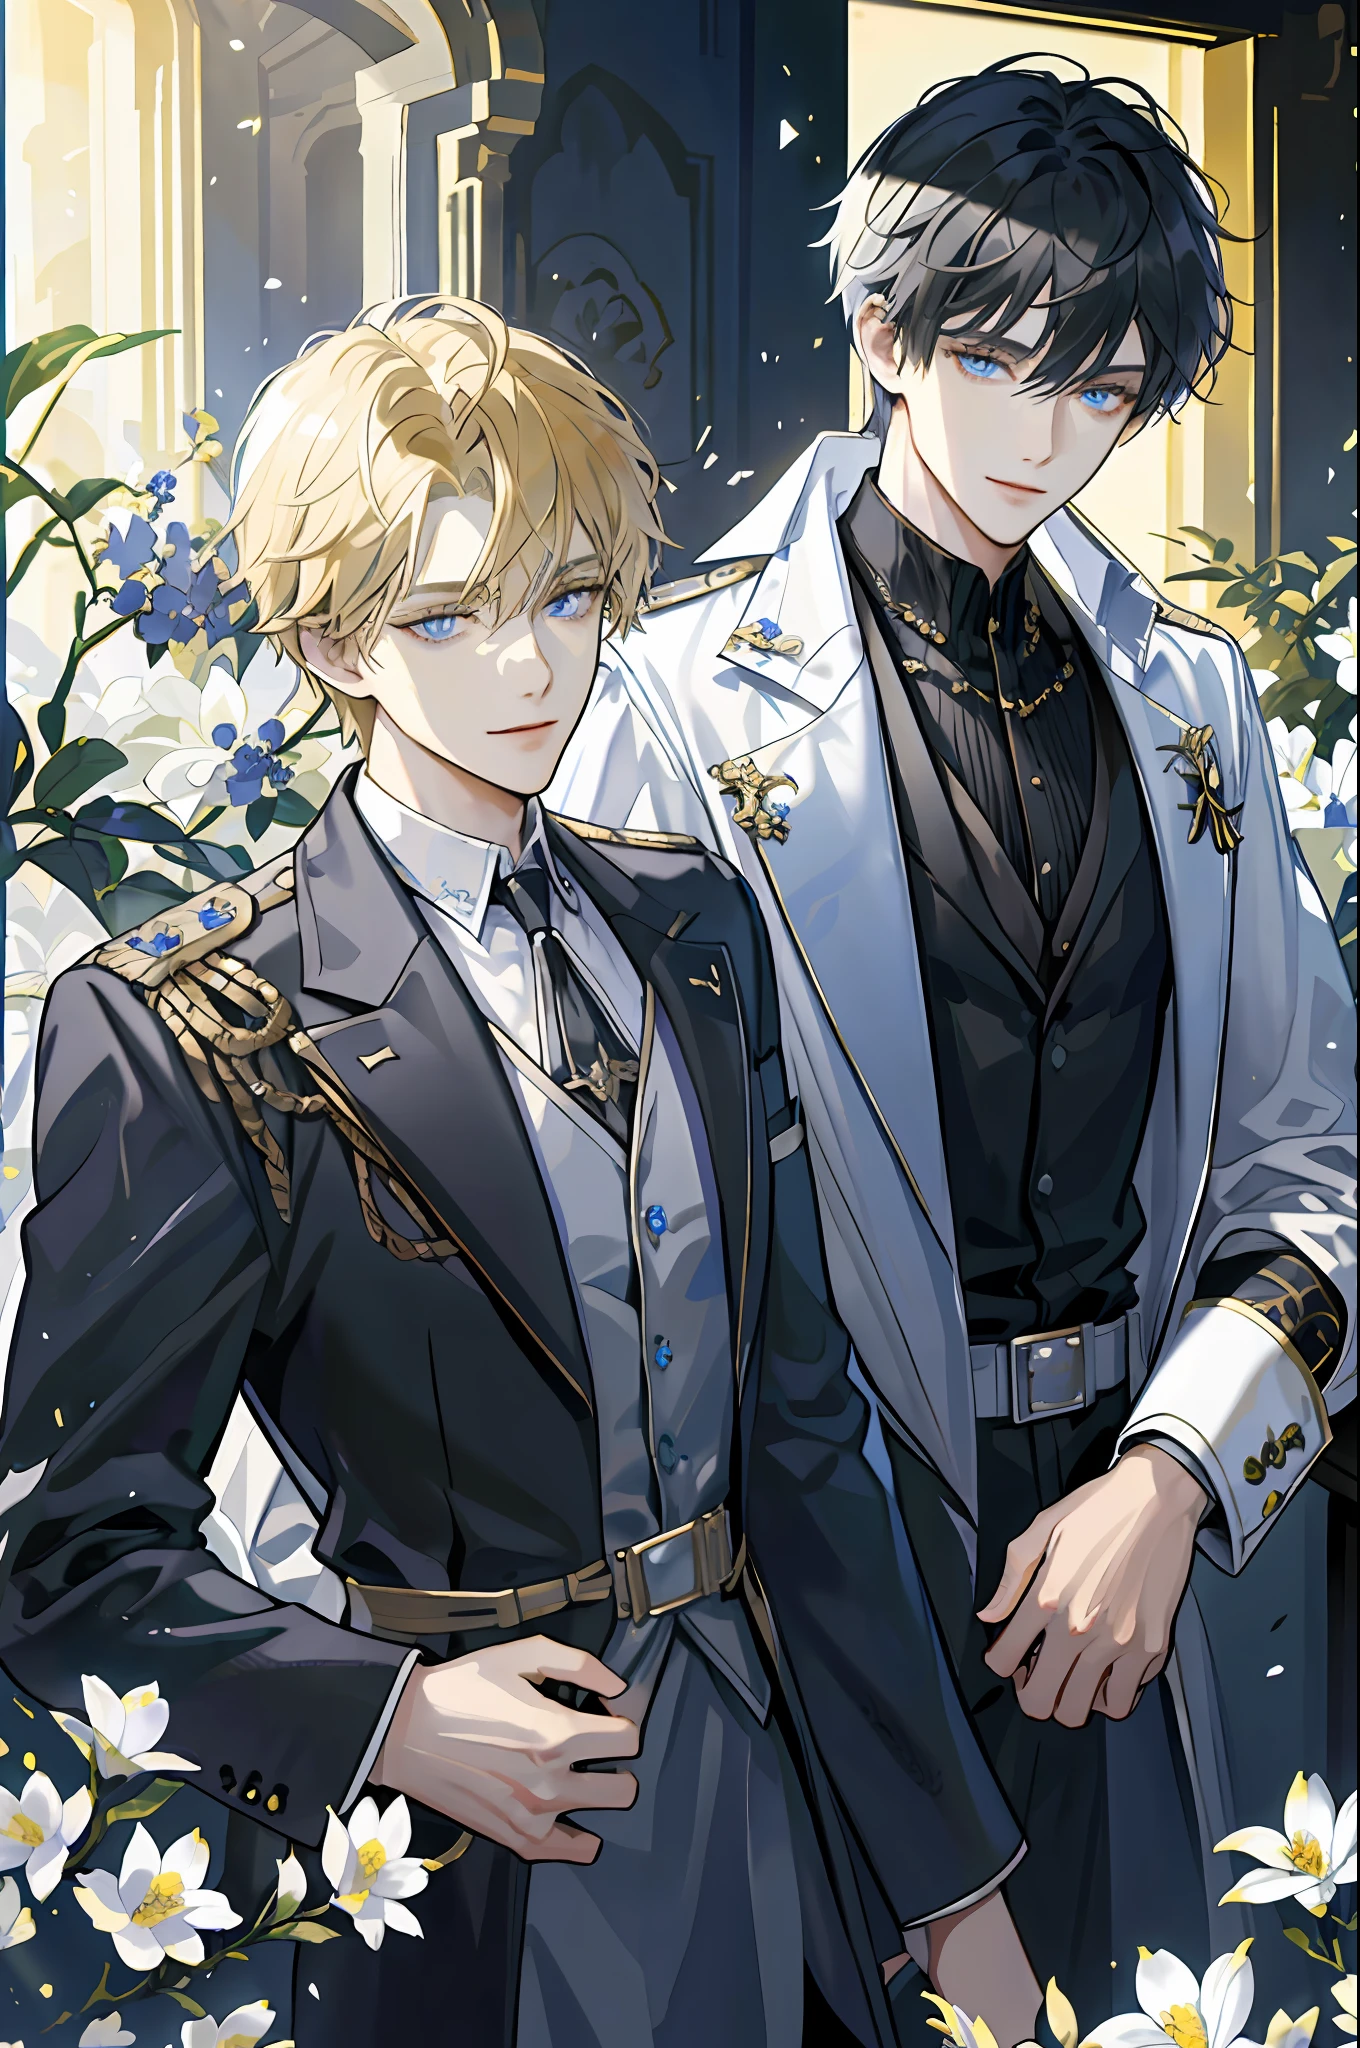 ((Masterpiece: 1.2, top quality)), ((2 men)), short blond hair, blue eyes (handsome: 1.4), white suit, uniform, royalty, tough black knight, short black hair, golden eyes, scar on right eye, black armor, fantasy, forest, blooming flowers, sunlight, fantastic light and shadow, landscape, highly detailed face, portrait, smile